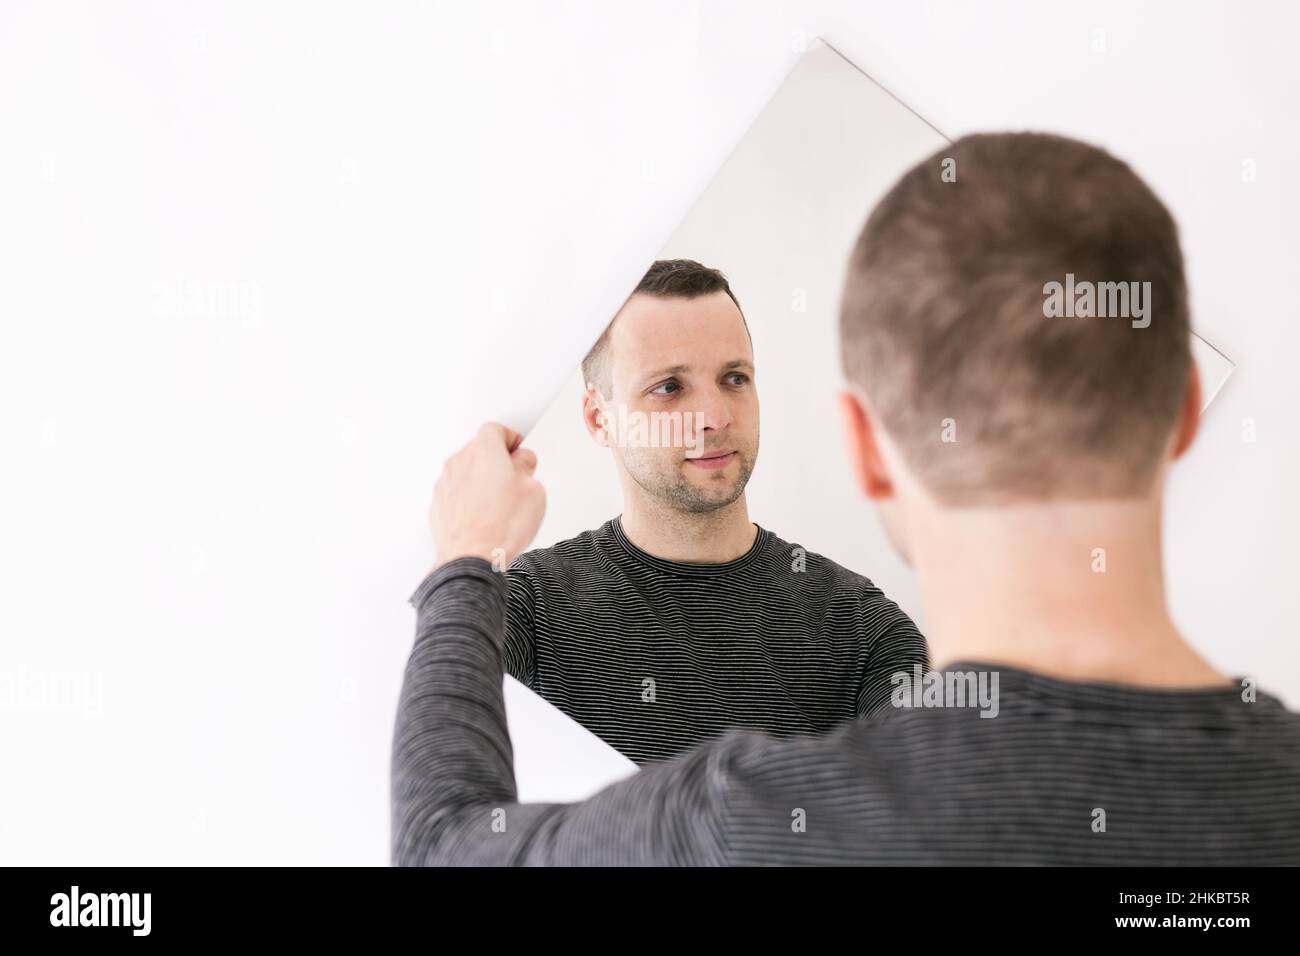 Portrait of young man standing in front of a white wall with a mirror in his hands Stock Photo